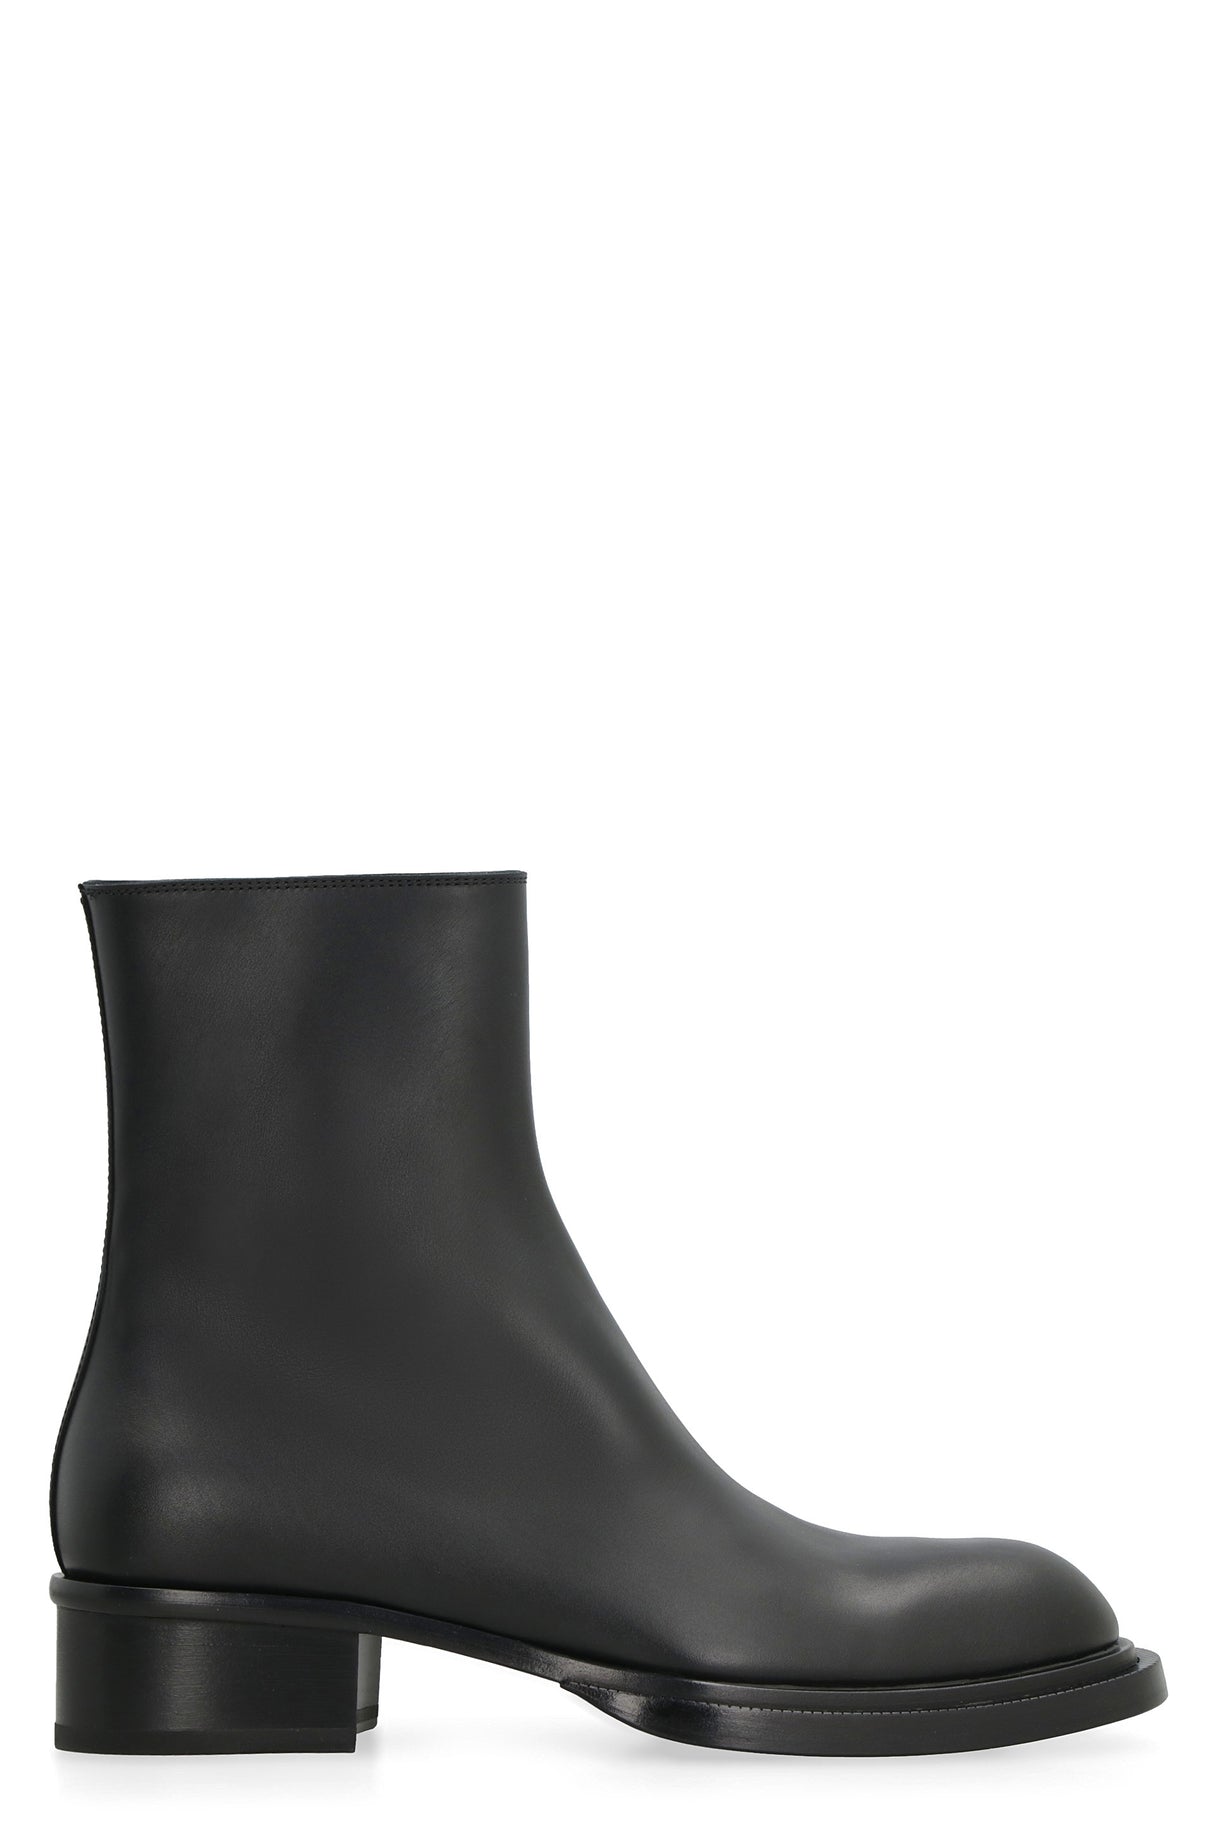 ALEXANDER MCQUEEN Classic Leather Ankle Boots for Men in Black